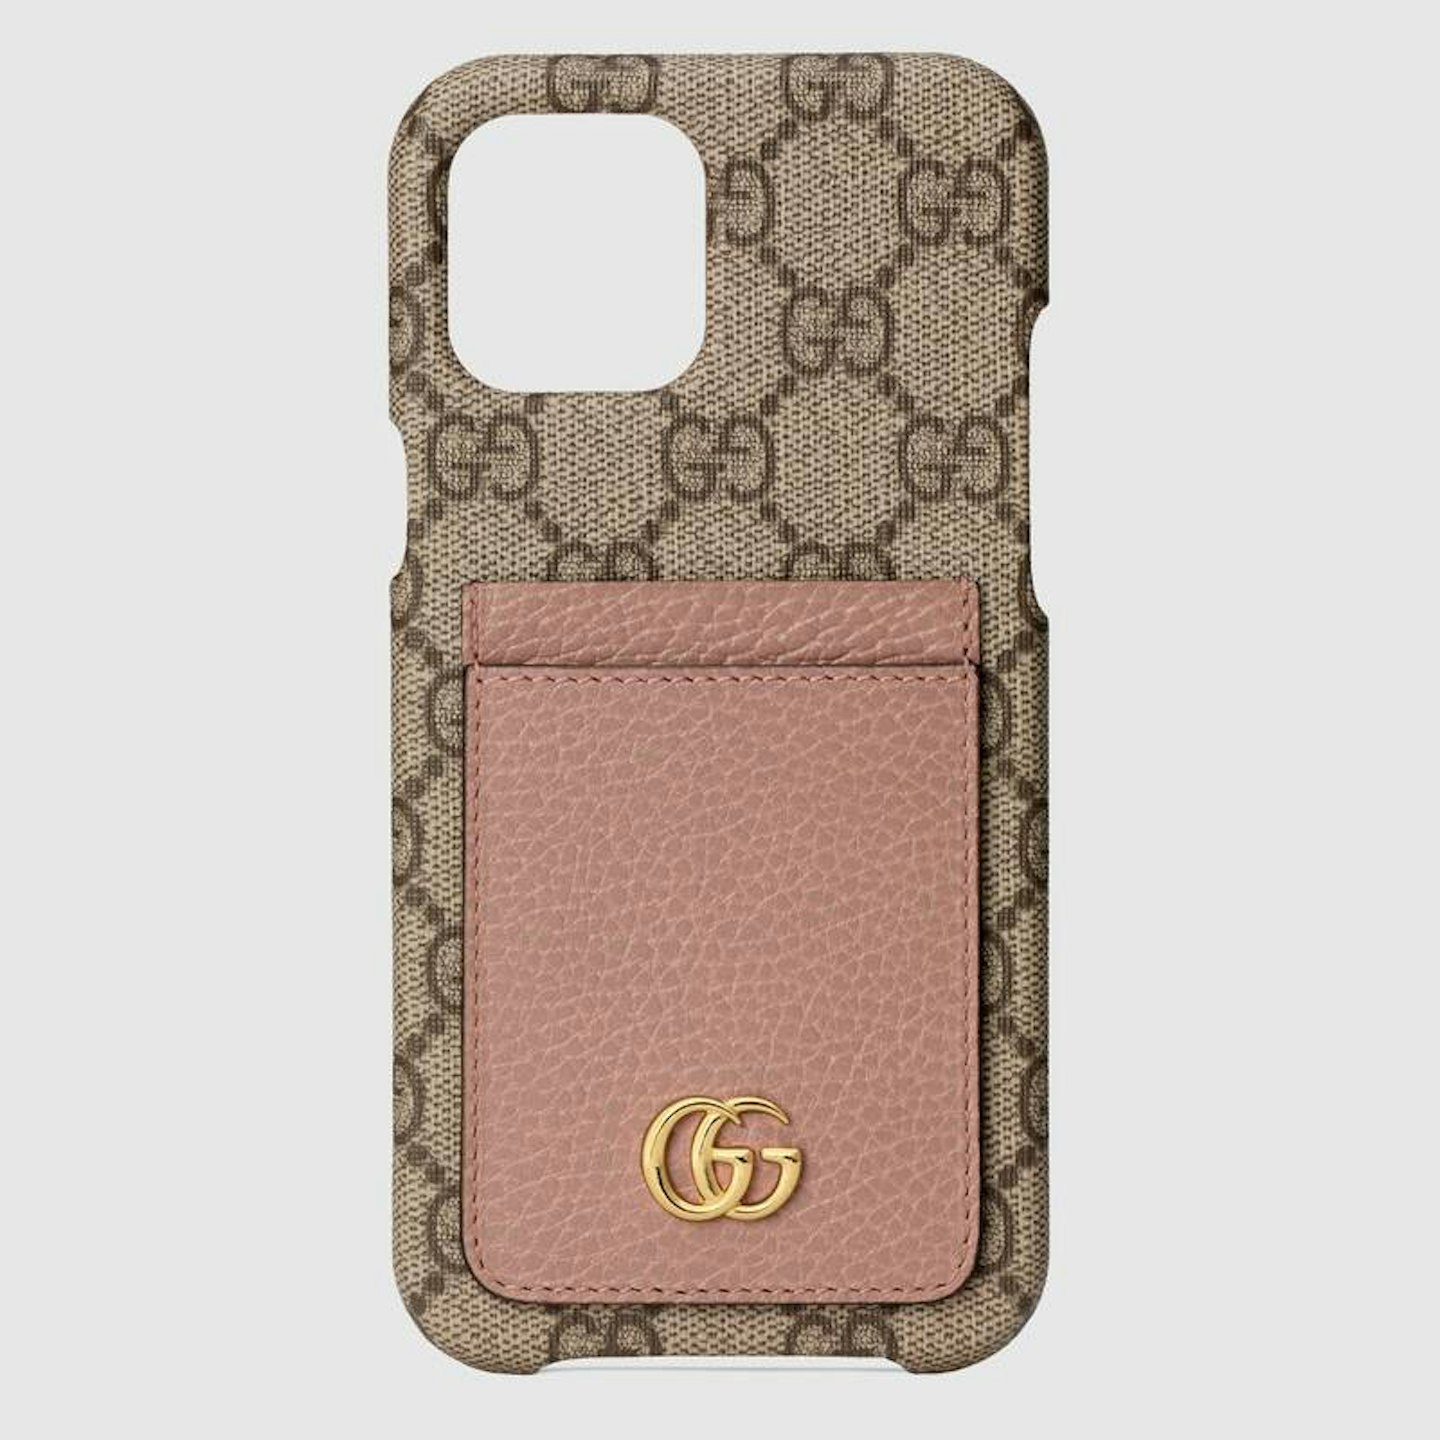 Gucci, GG Marmont iPhone 12 Pro Max case, £260